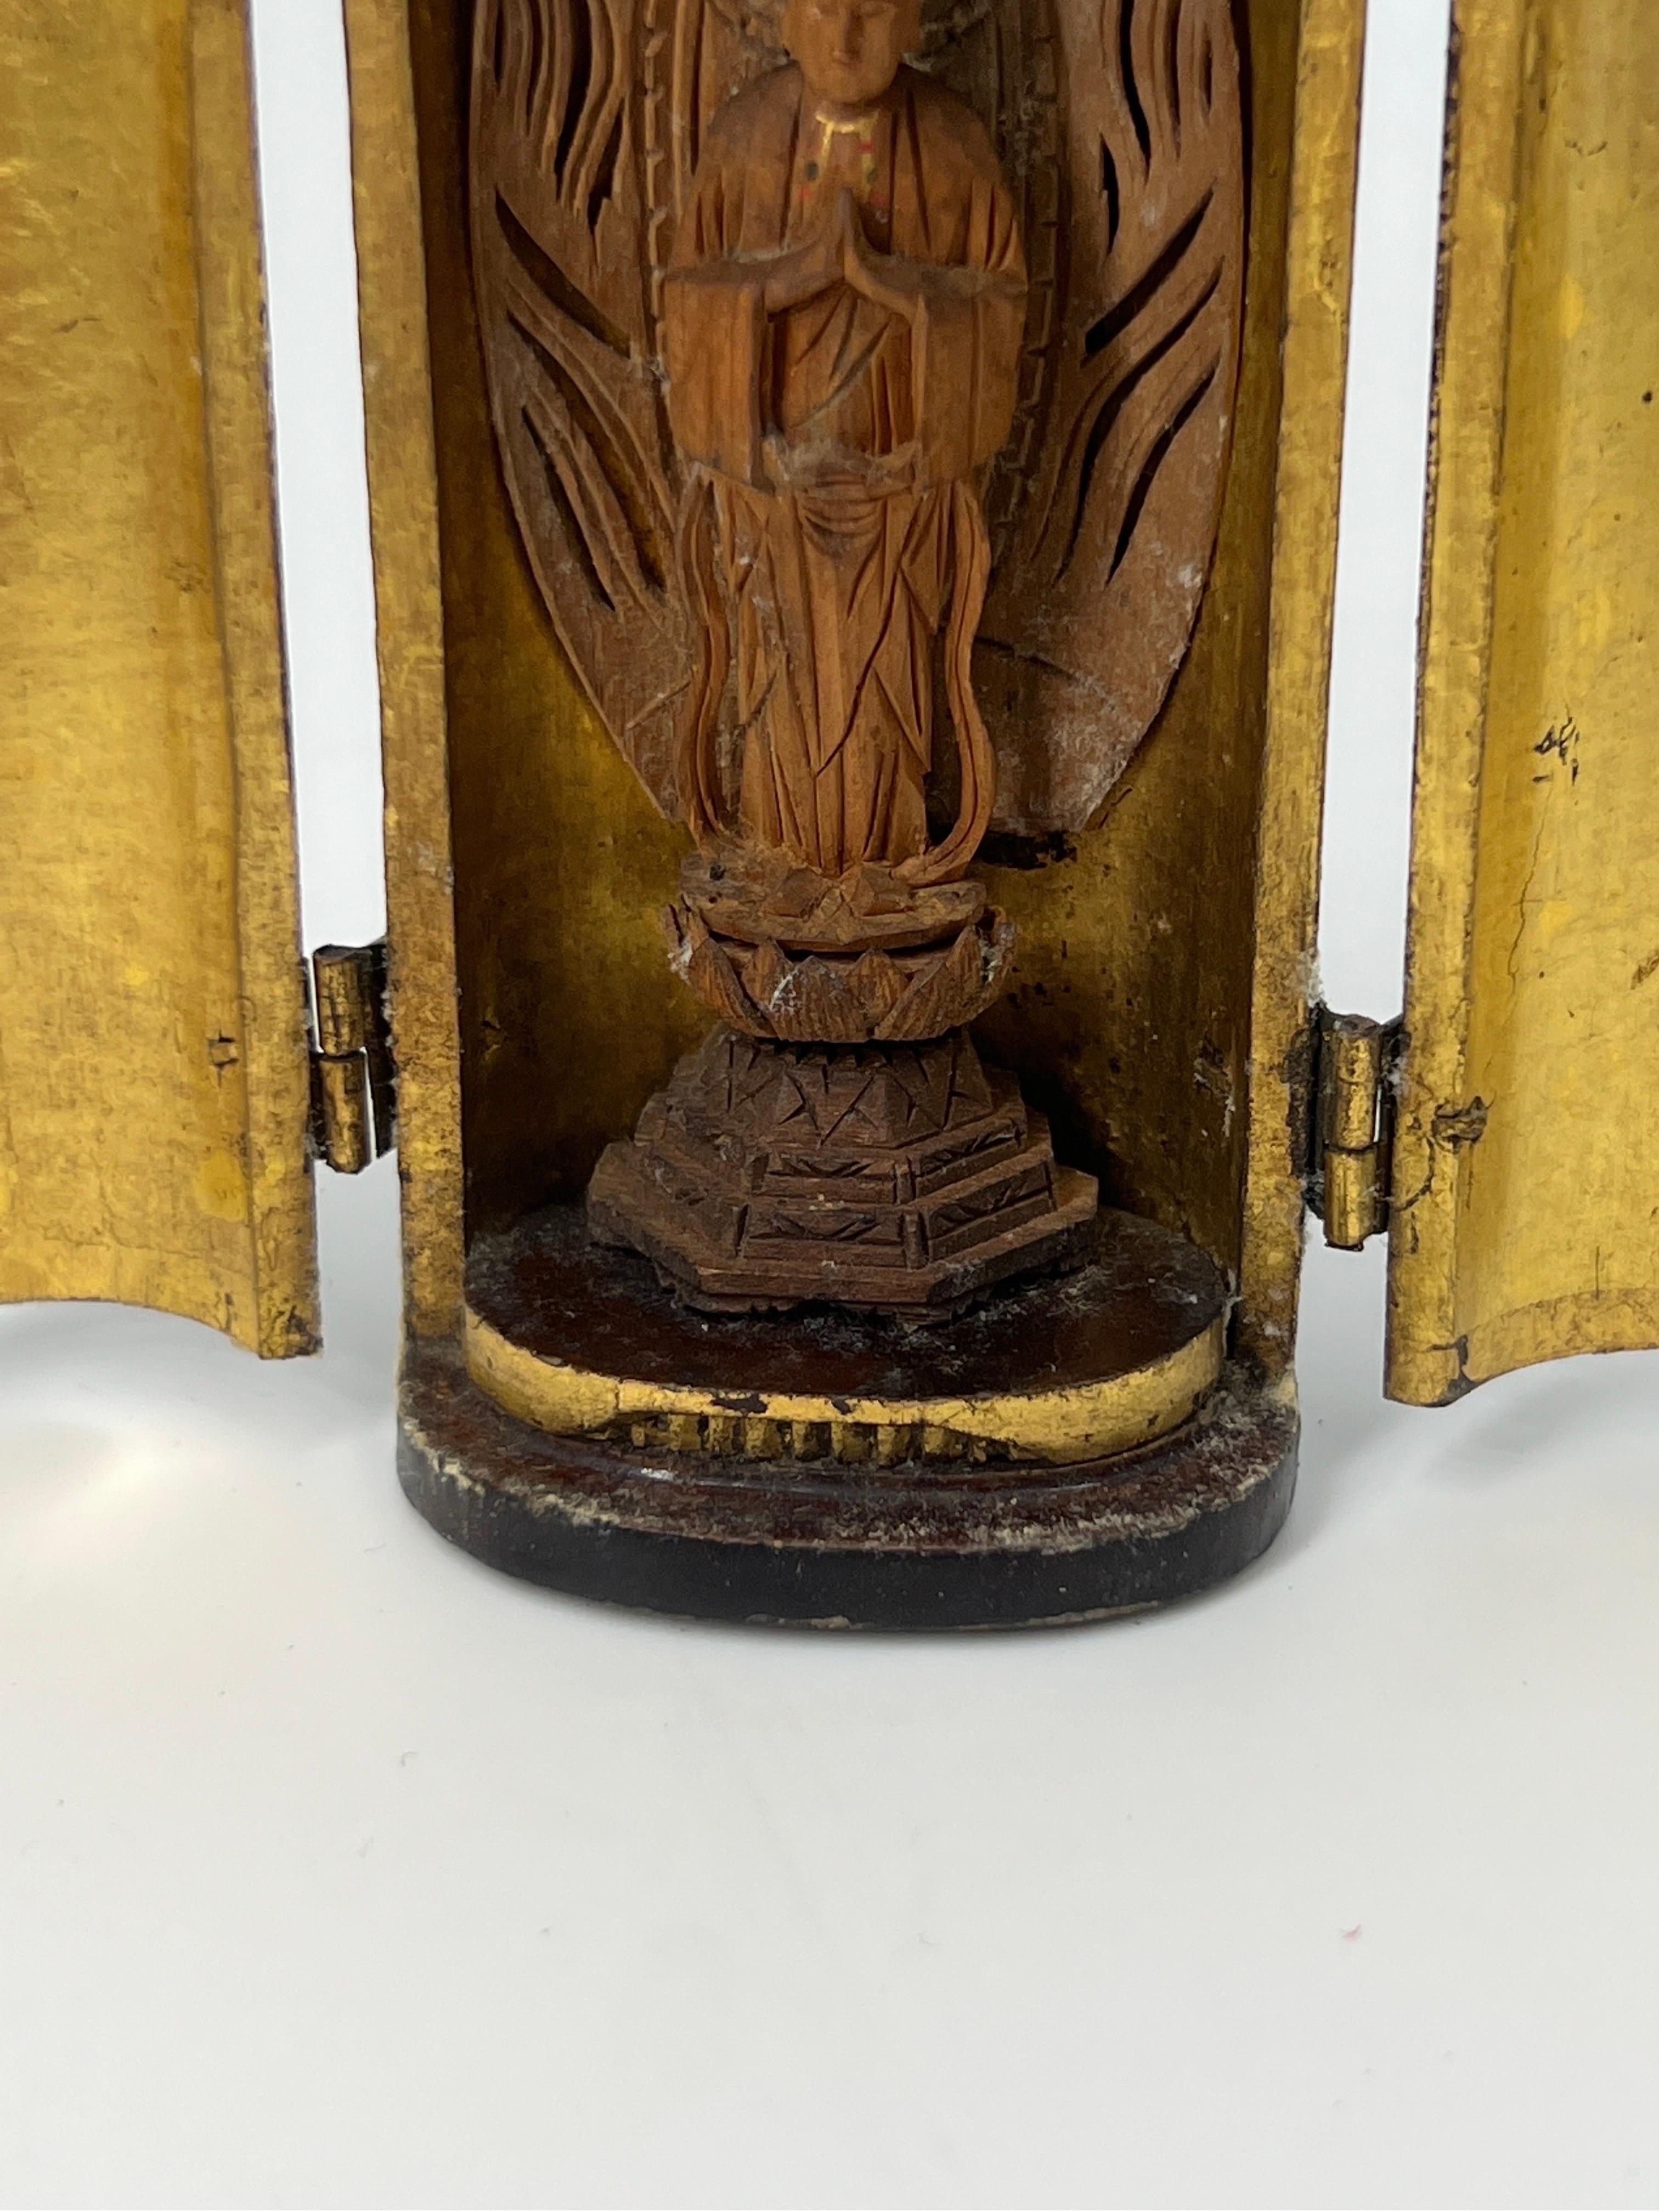 Antique Japanese Meiji Period Lacquer & Giltwood Zushi Shrine, Traveling Alter

Made of fine quality black lacquered case, internally gold leafed and hand carved buddhist figure on shrine.